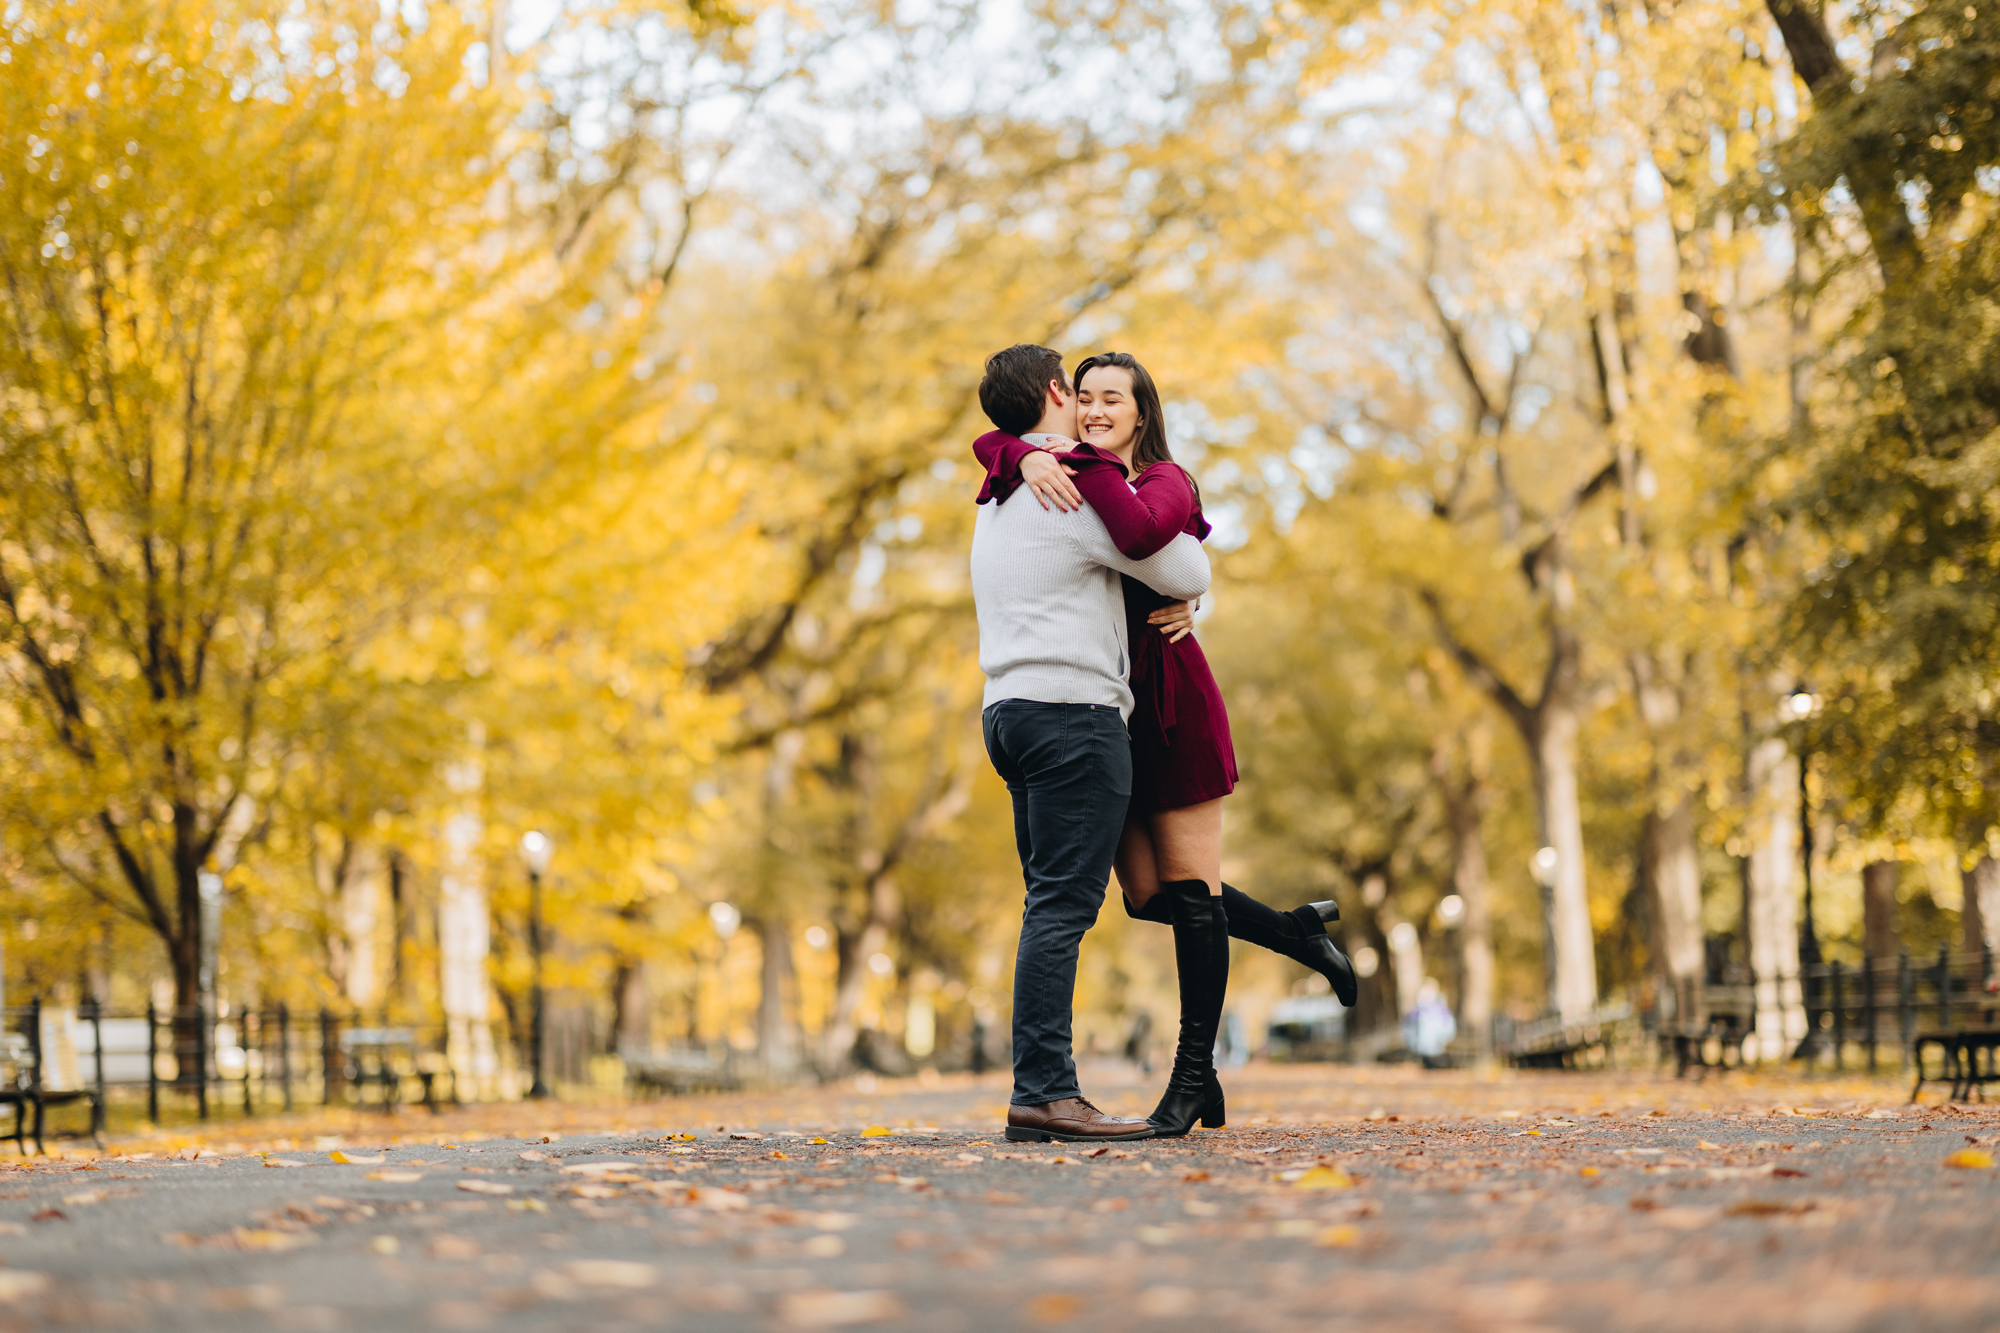 Gorgeous Fall Engagement Photos in Central Park New York